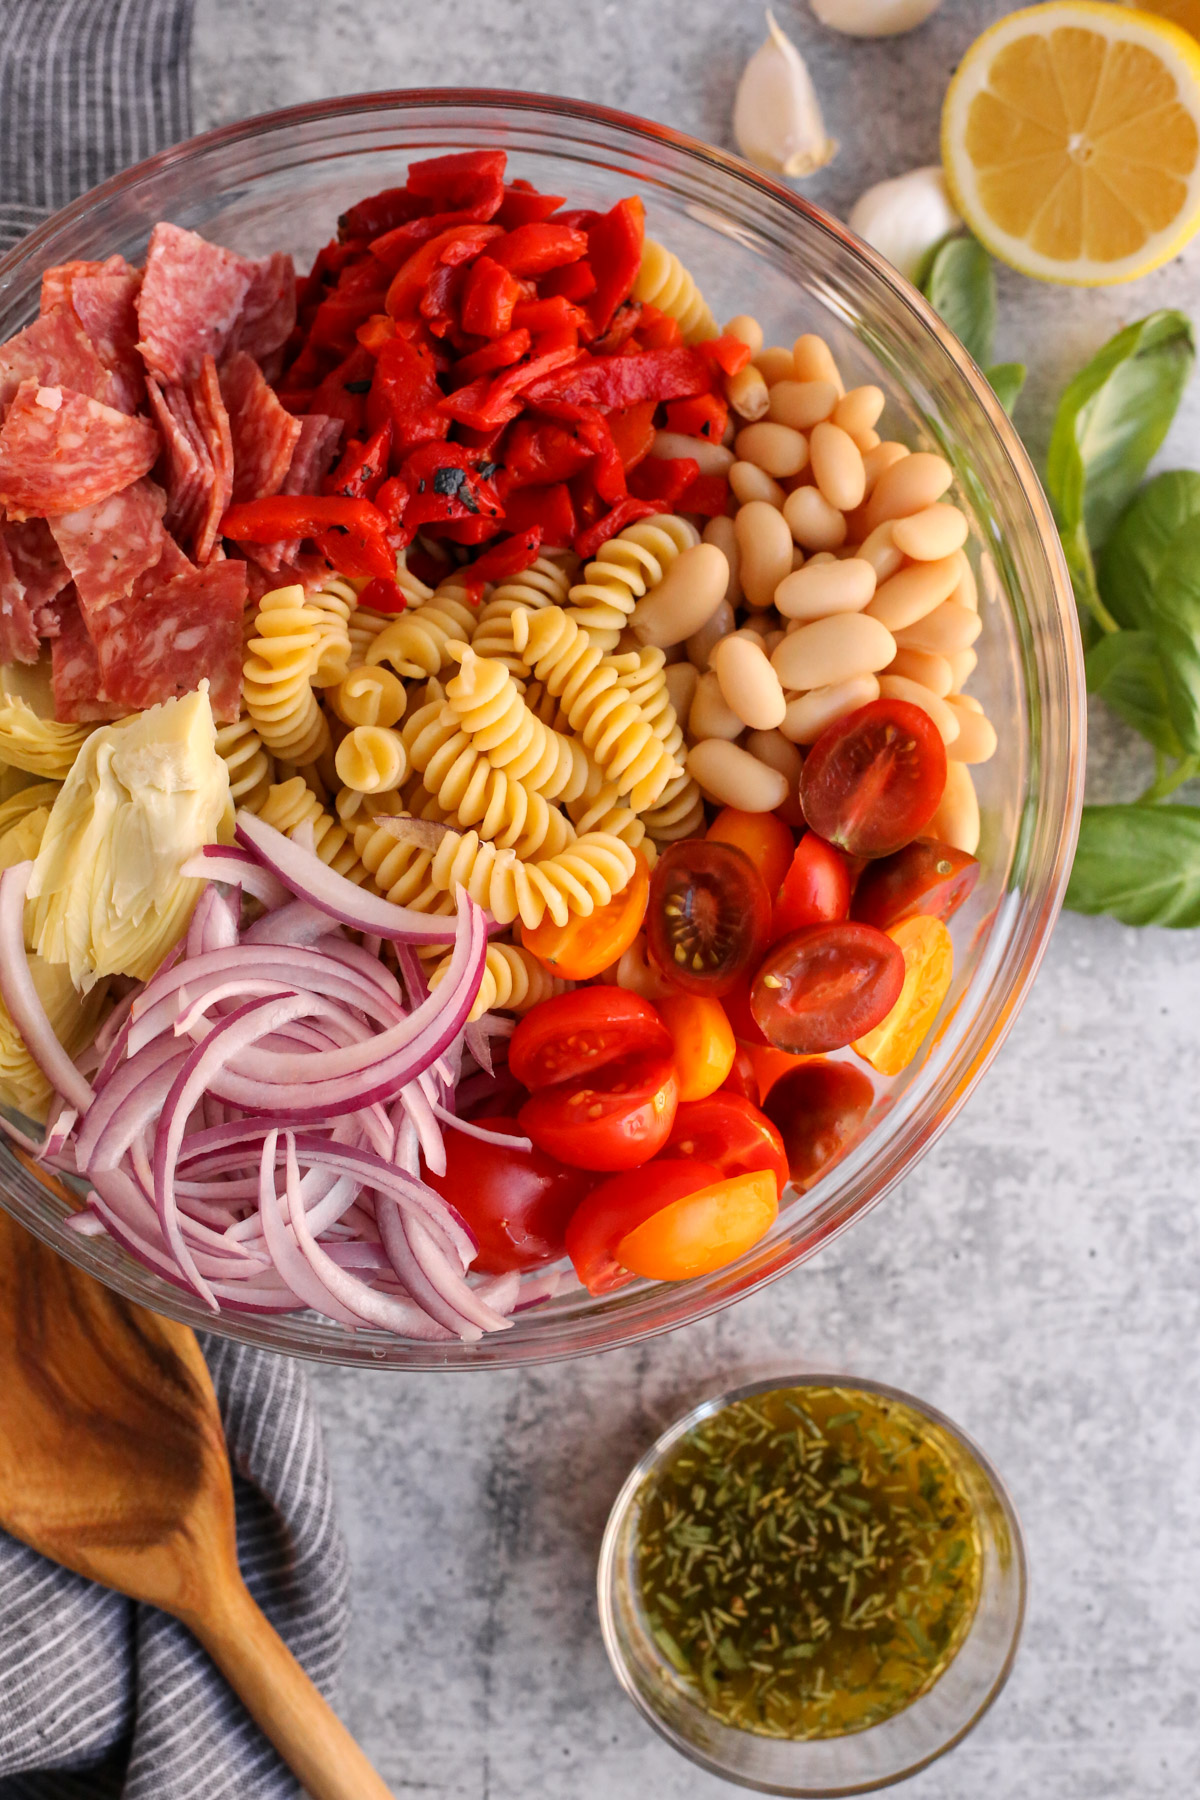 An overhead view of a clear glass mixing bowl containing sliced red onions, artichoke hearts, sliced pepperoni, roasted red peppers, cannellini beans, cherry tomatoes, and cooked pasta, with an Italian-style vinaigrette, fresh basil, lemon, and garlic cloves are displayed around it